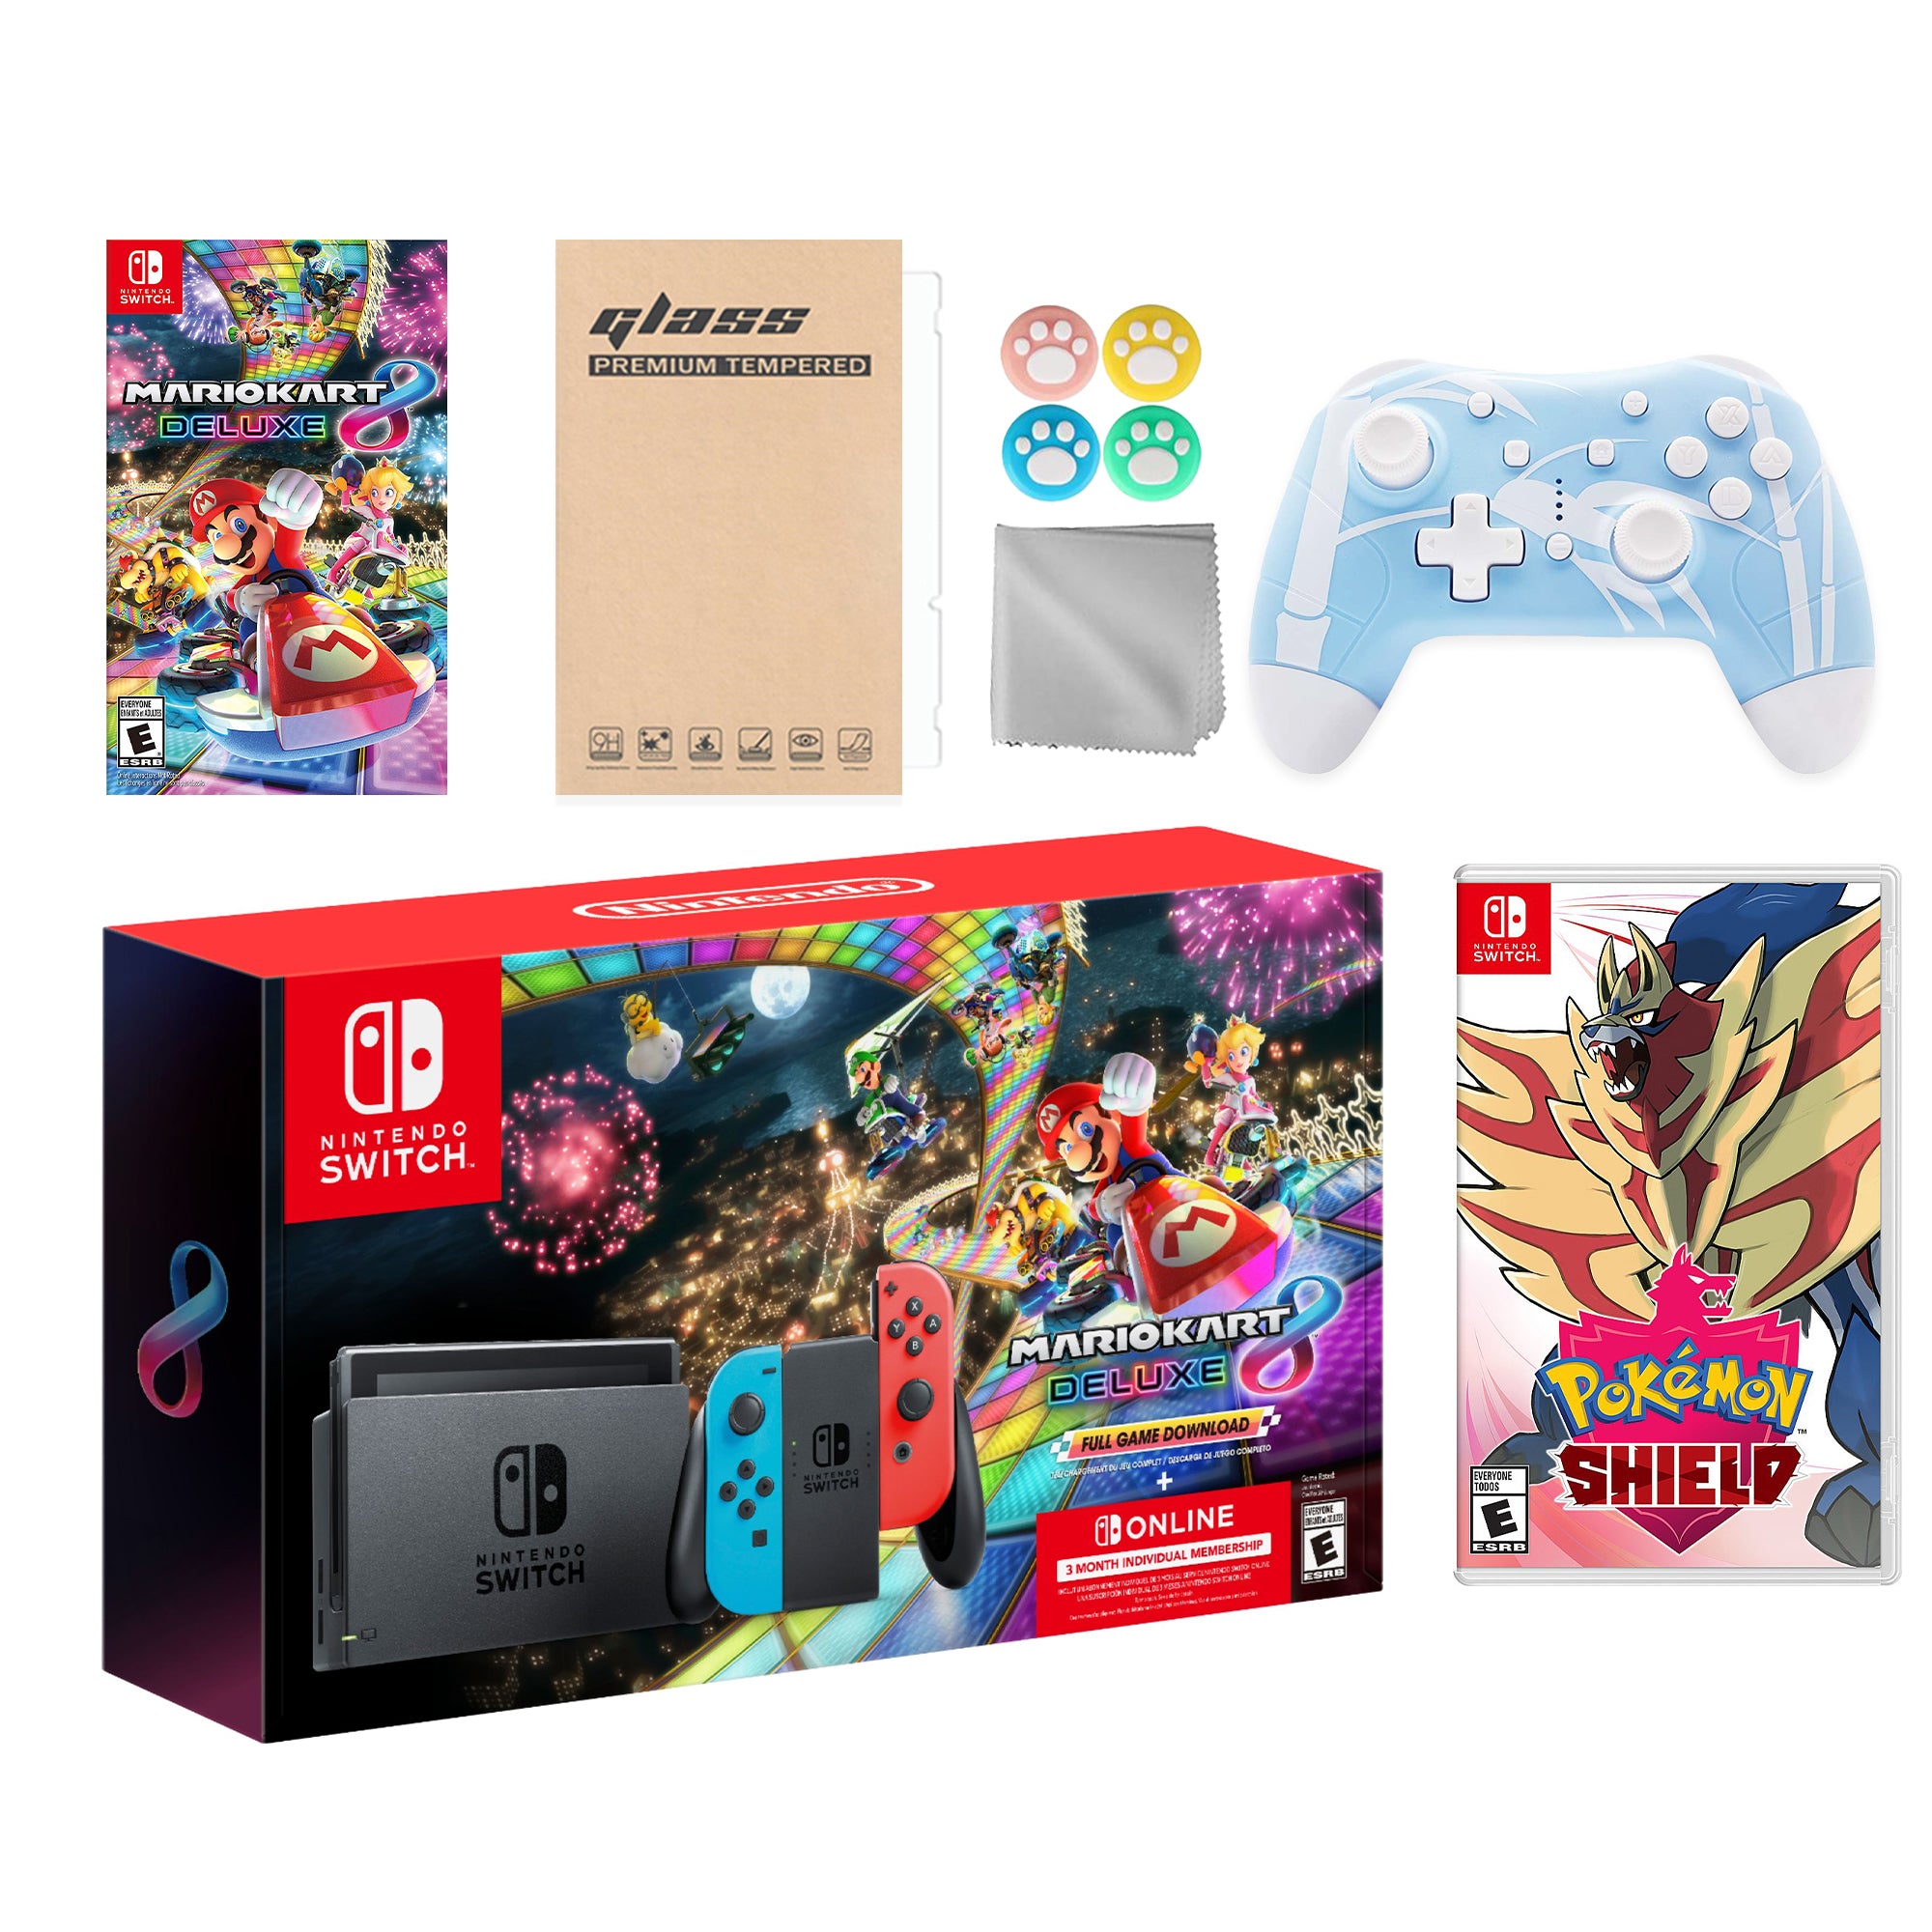 Nintendo Switch Mario Kart 8 Deluxe Bundle: Red Blue Console, Mario Kart 8 & Membership, Pokemon Shield, Mytrix Wireless Pro Controller Blue Bamboo and Accessories